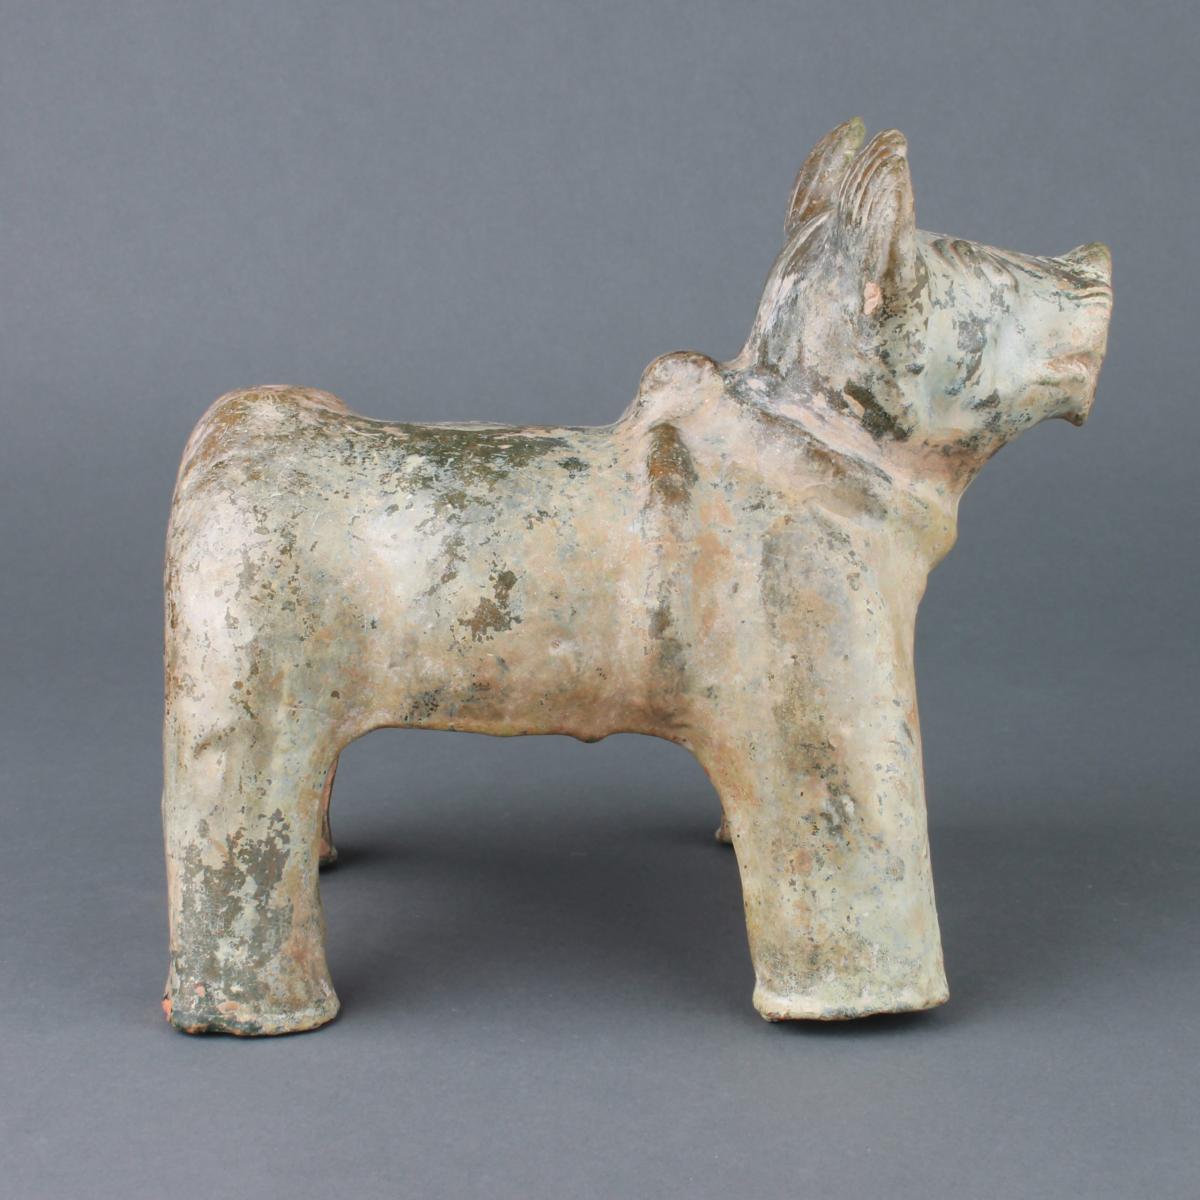 A Chinese green lead glazed standing figure of a dog, Han Dynasty, 206BC-220AD